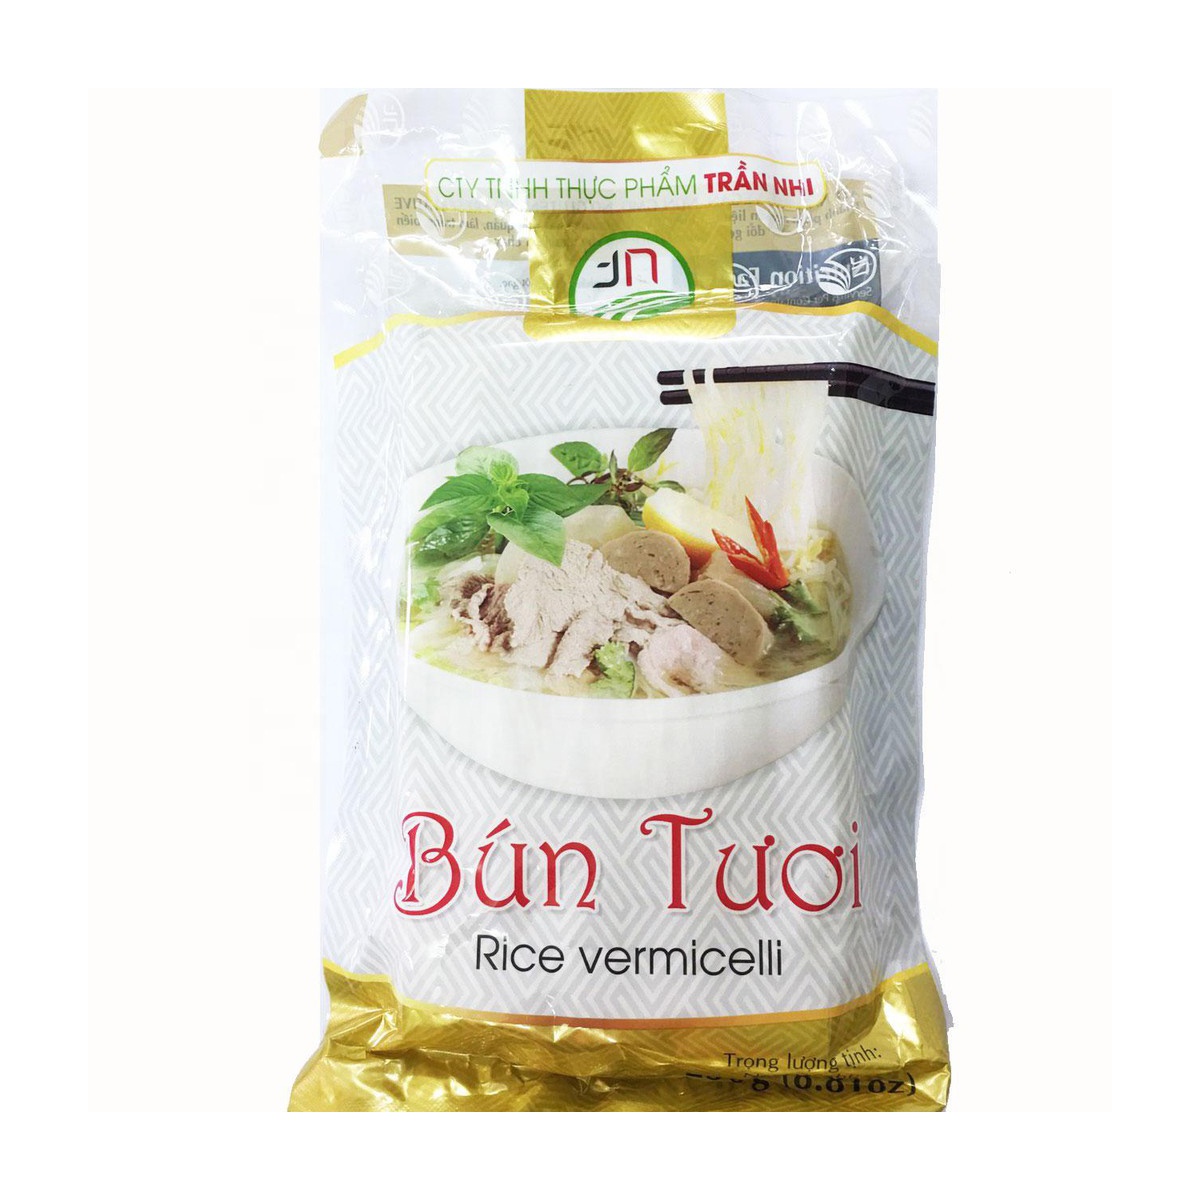 Rice Vermicelli Reliable And Cheap Wholesale Rice Noodle - Tran Nhi Rice Vermicelli 1.1mm